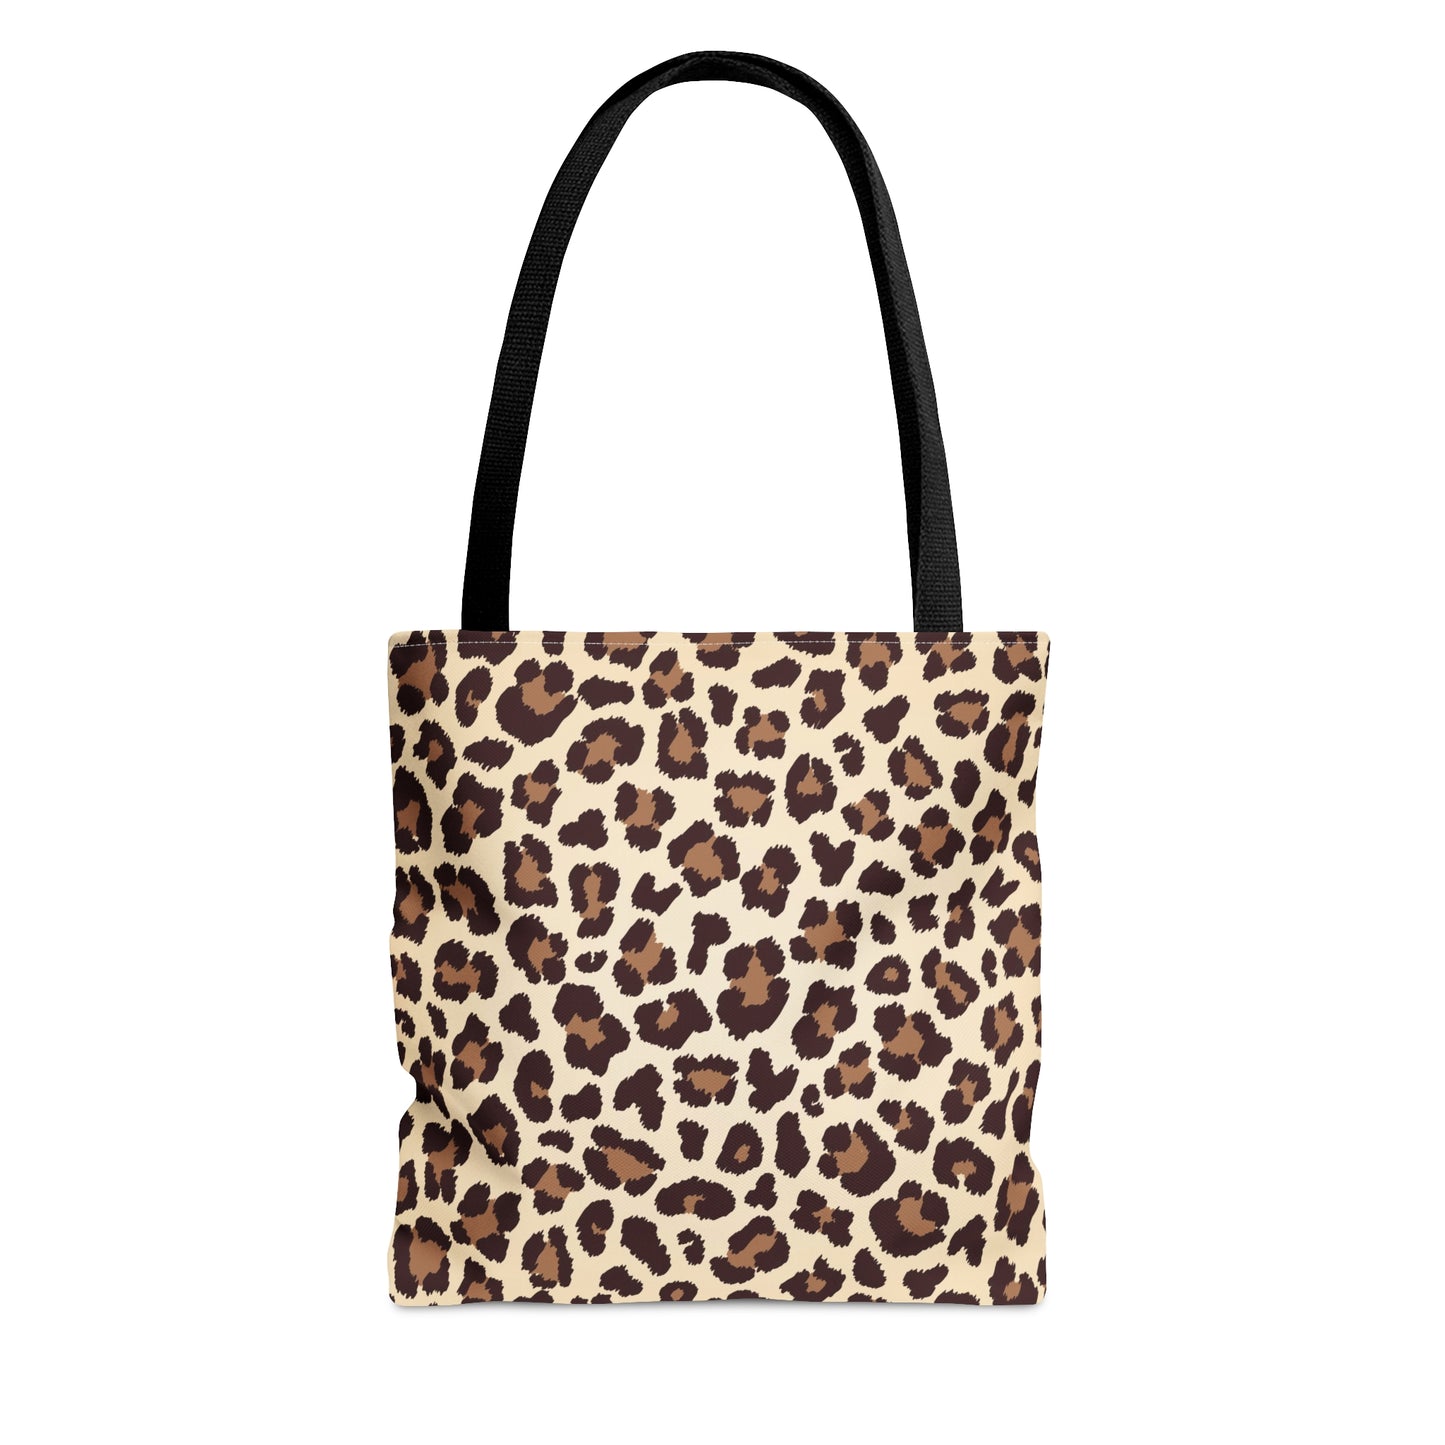 Leopard Print Tote Bag, Book Bag, Travel Bag, Grocery Bag, Handy Tote, Bag for School, Gifts For Her, Gifts For Teacher